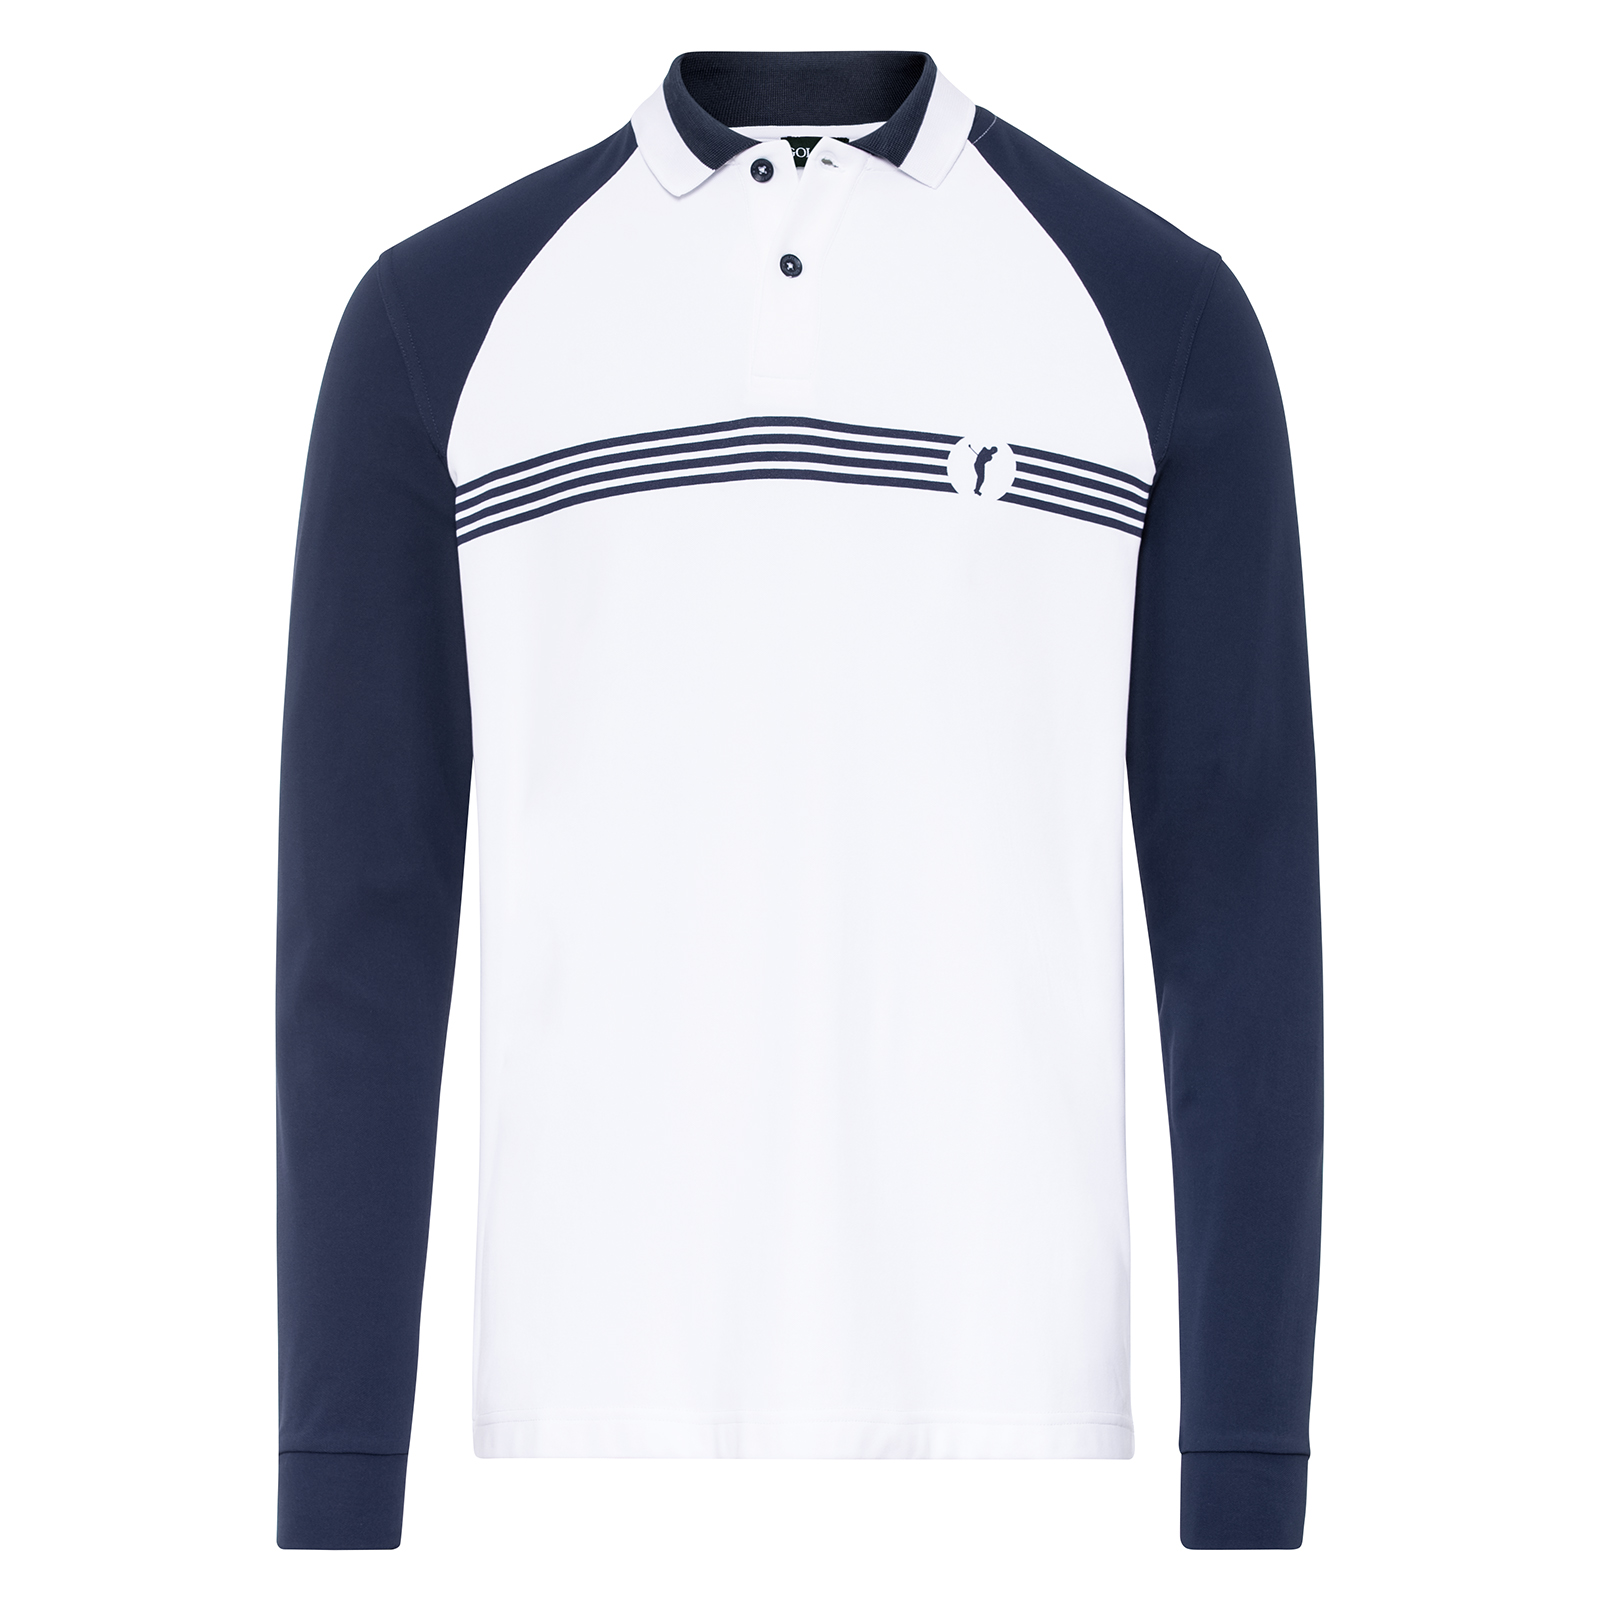 Men’s long-sleeved polo shirt with new logo design and moisture-regulating function